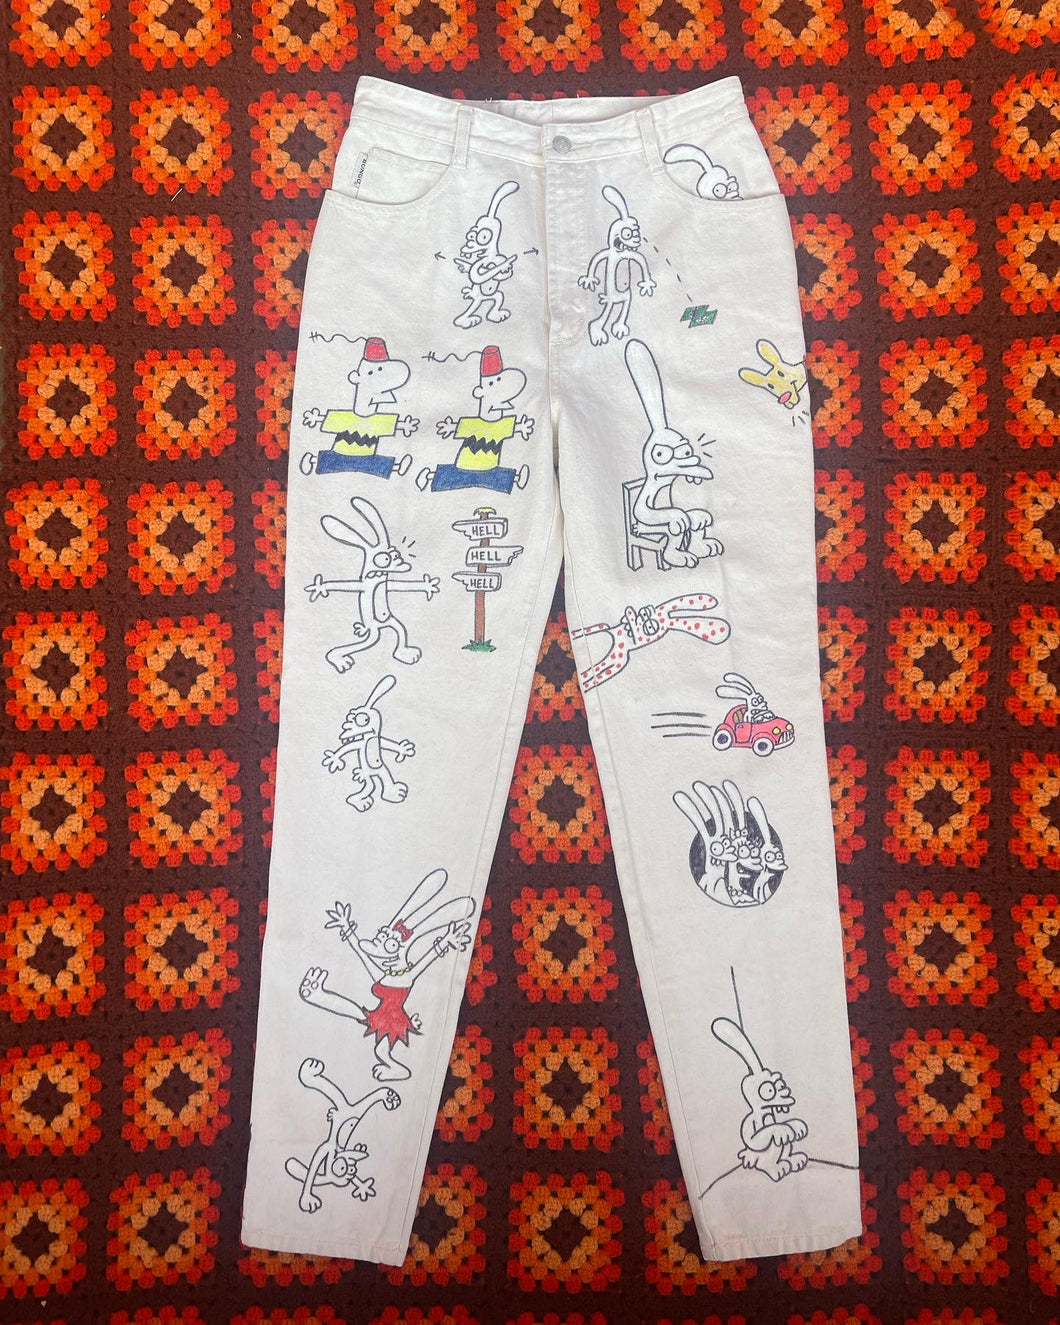 “Life in Hell” bongo jeans